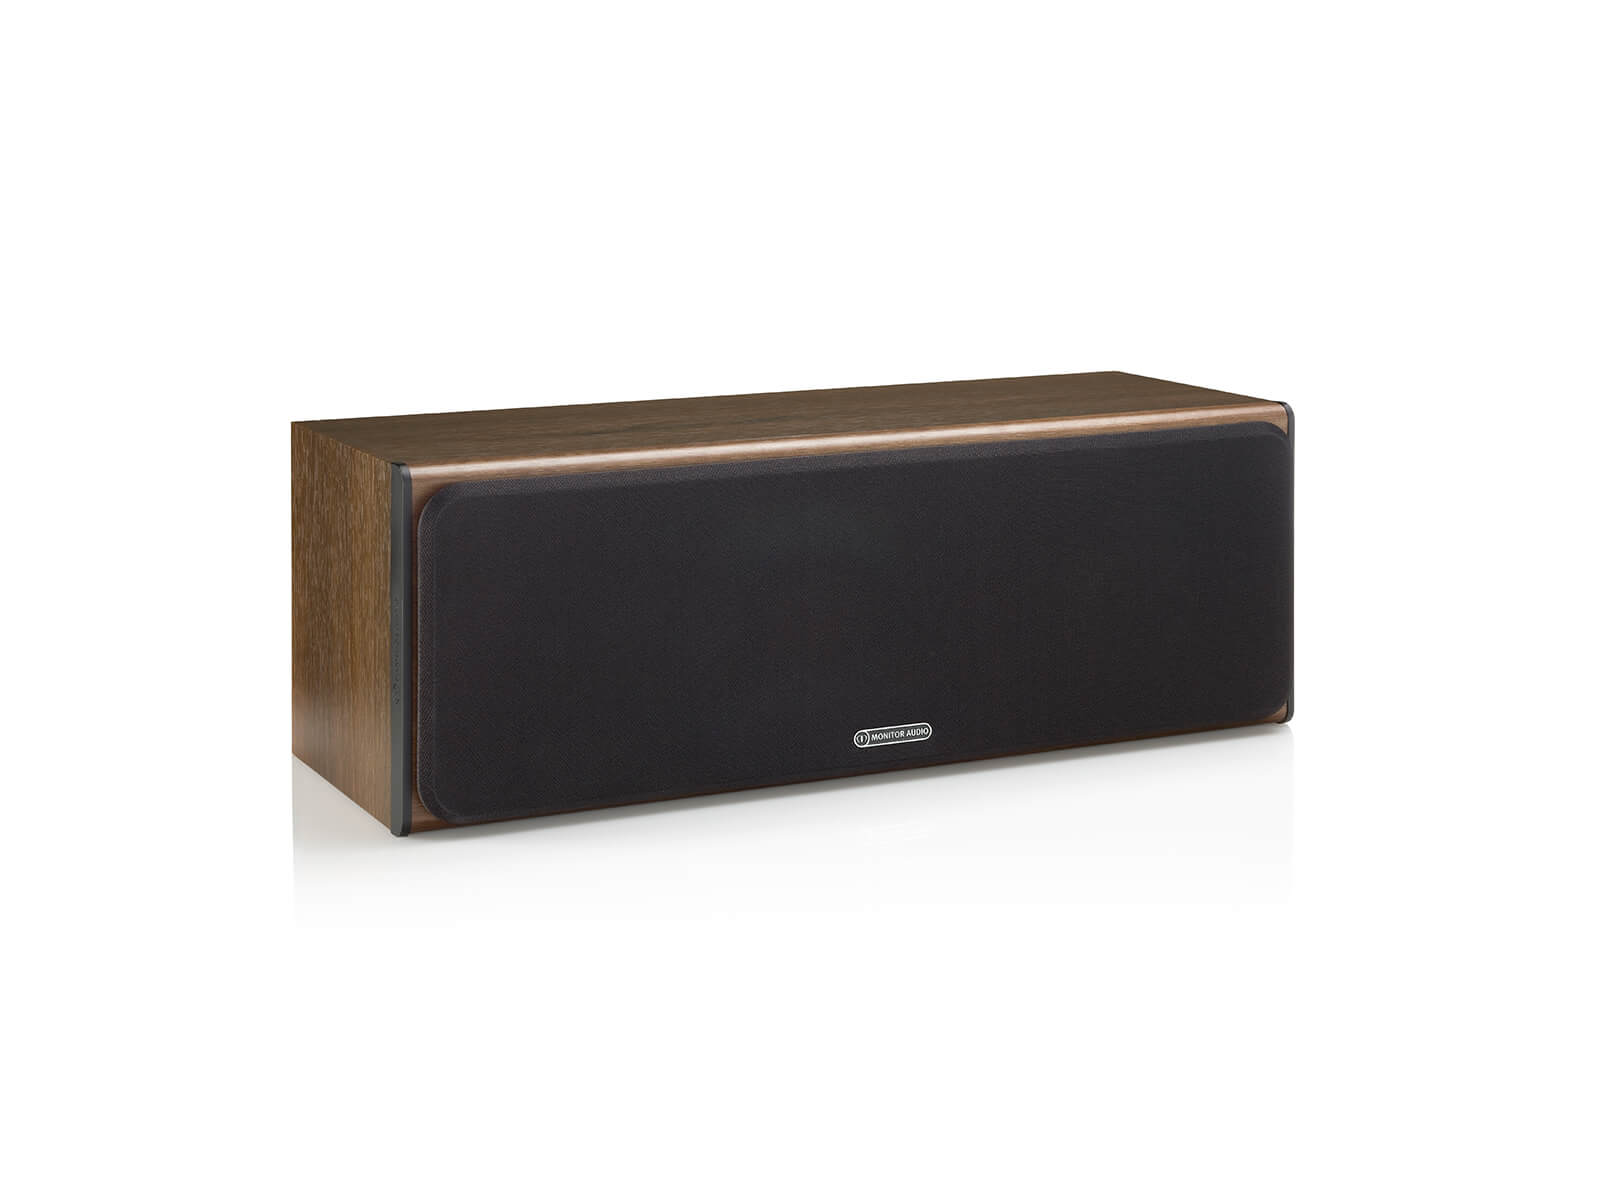 Bronze Centre, centre channel speakers, featuring a grille and a walnut vinyl finish.